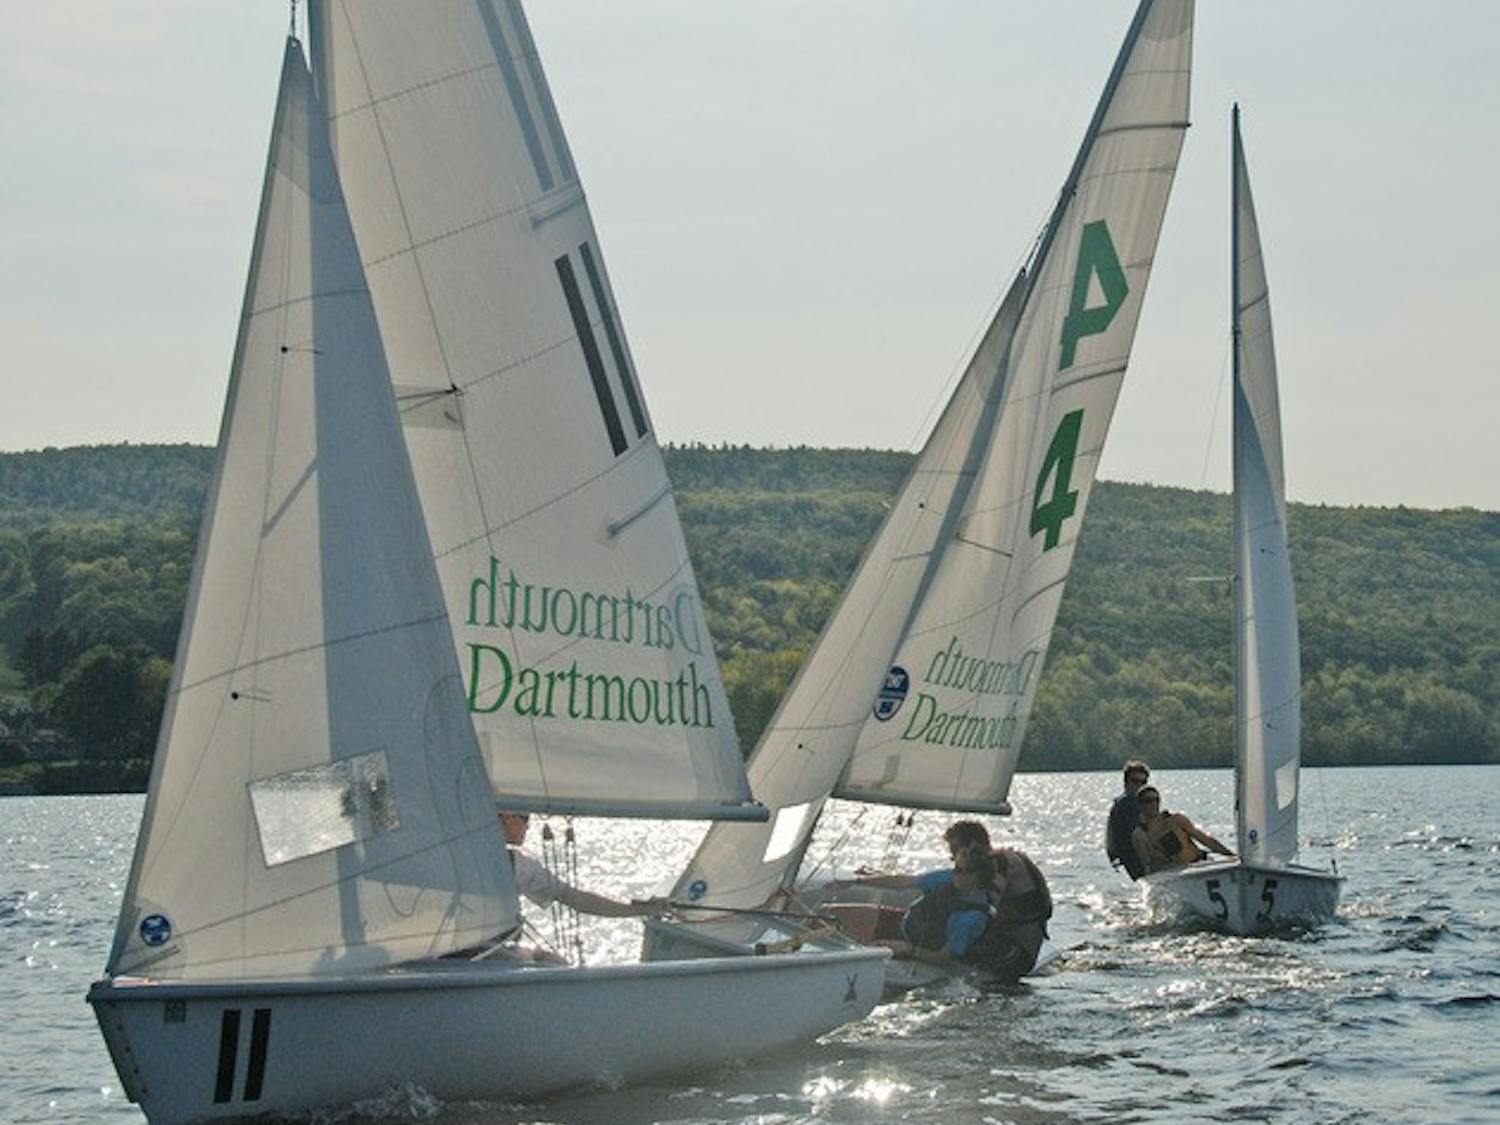 Dartmouth sailors found mixed results in four different regattas up and down the East Coast this weekend.